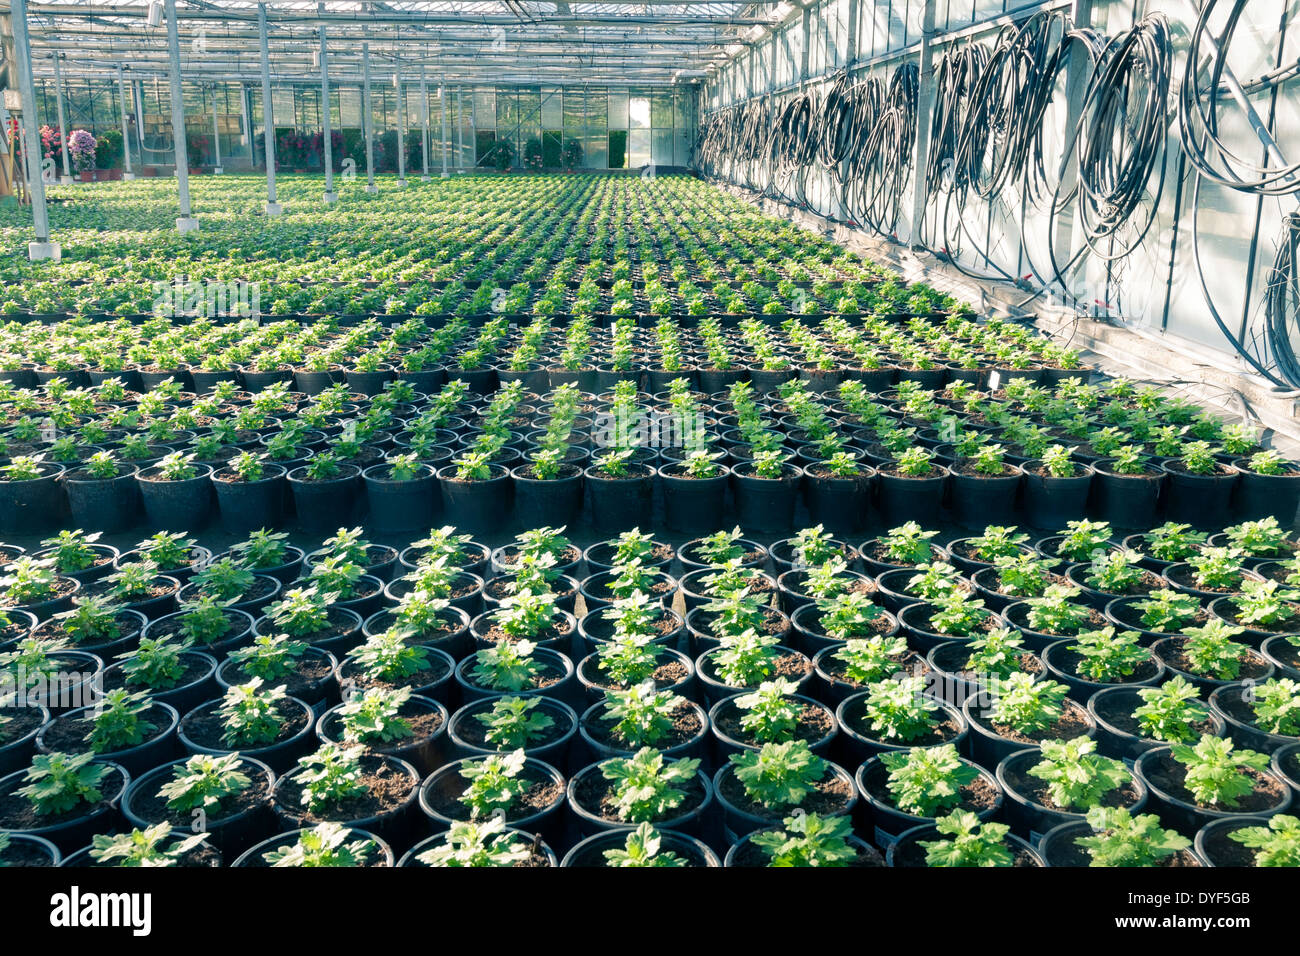 industrial greenhouse plantation with many small plants in flower pots Stock Photo